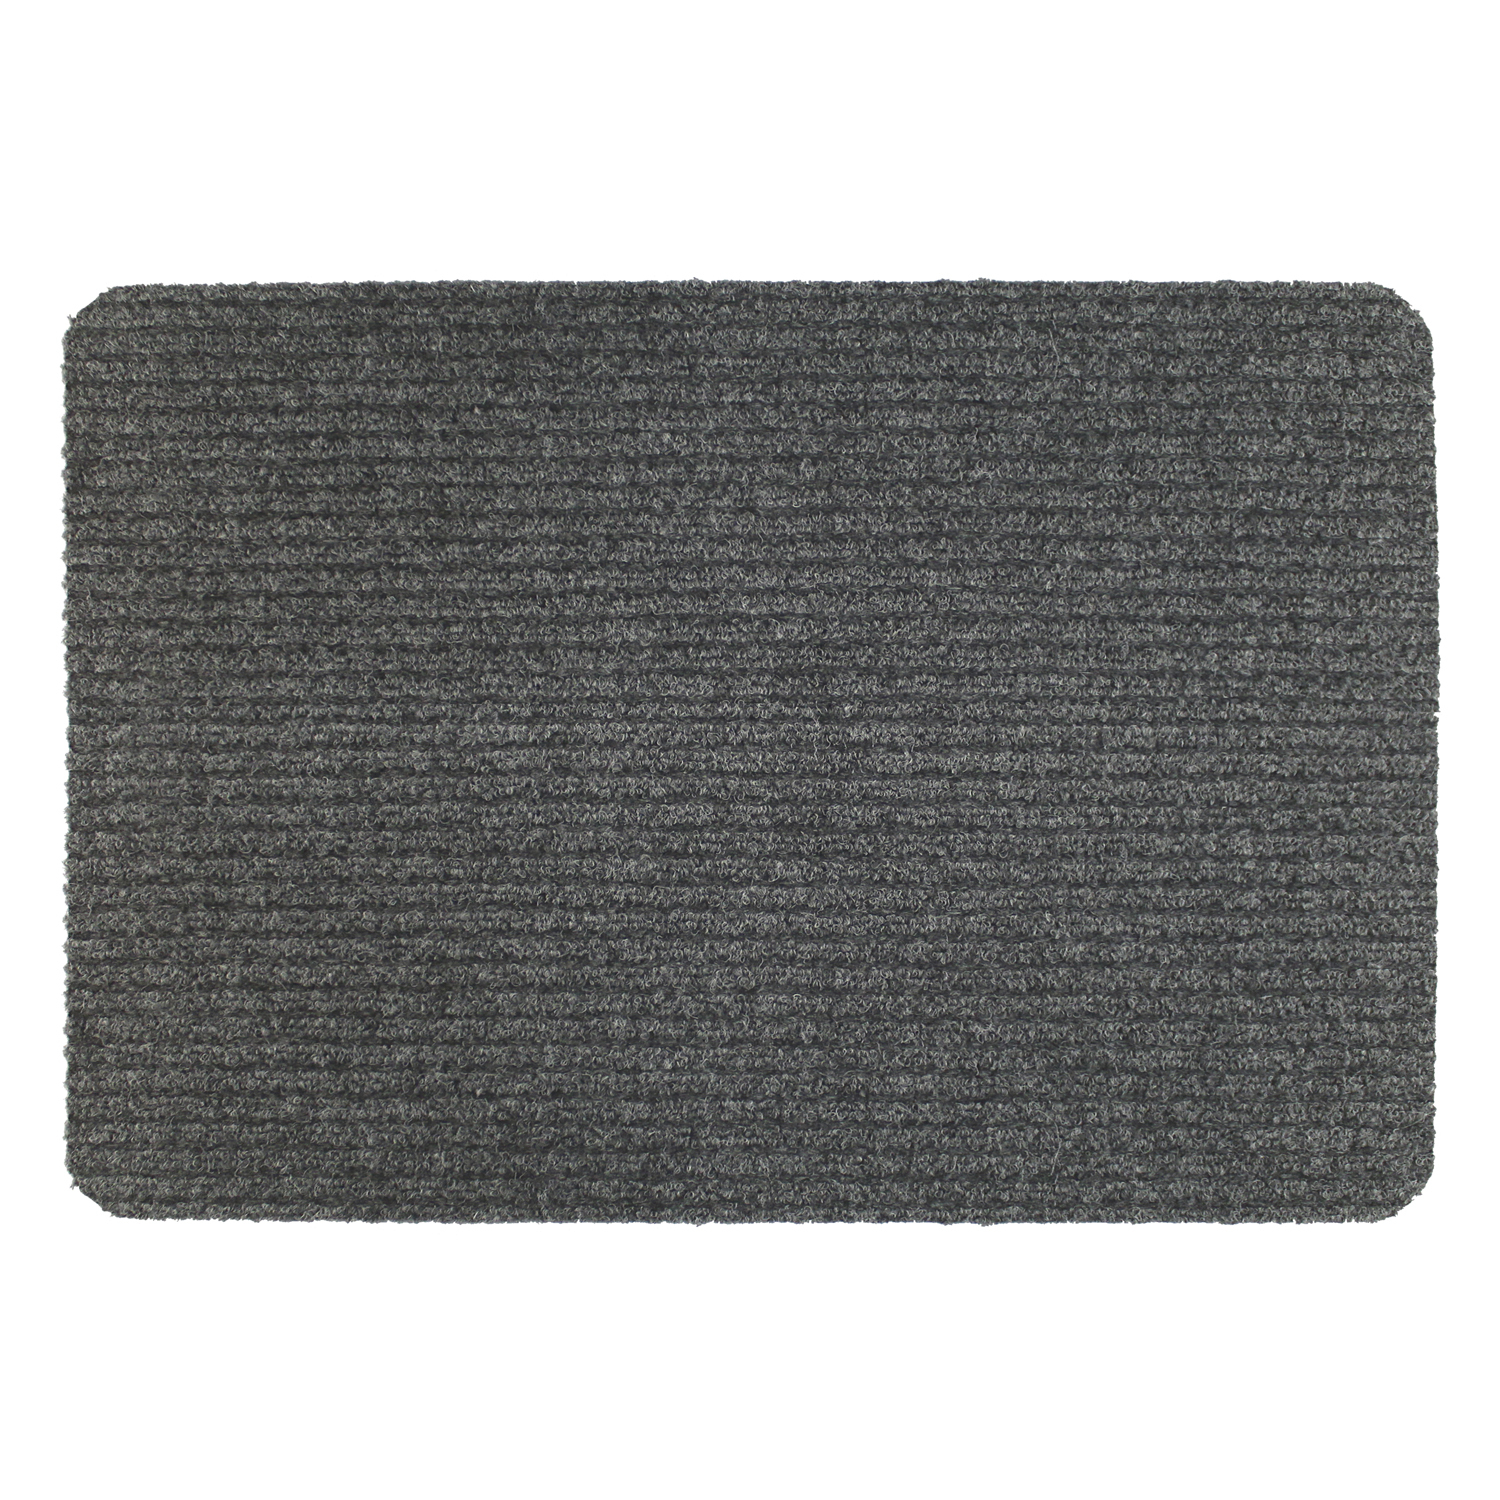 Single My Home Juno Large Ribbed Doormat 80 x 50cm in Assorted styles Image 3